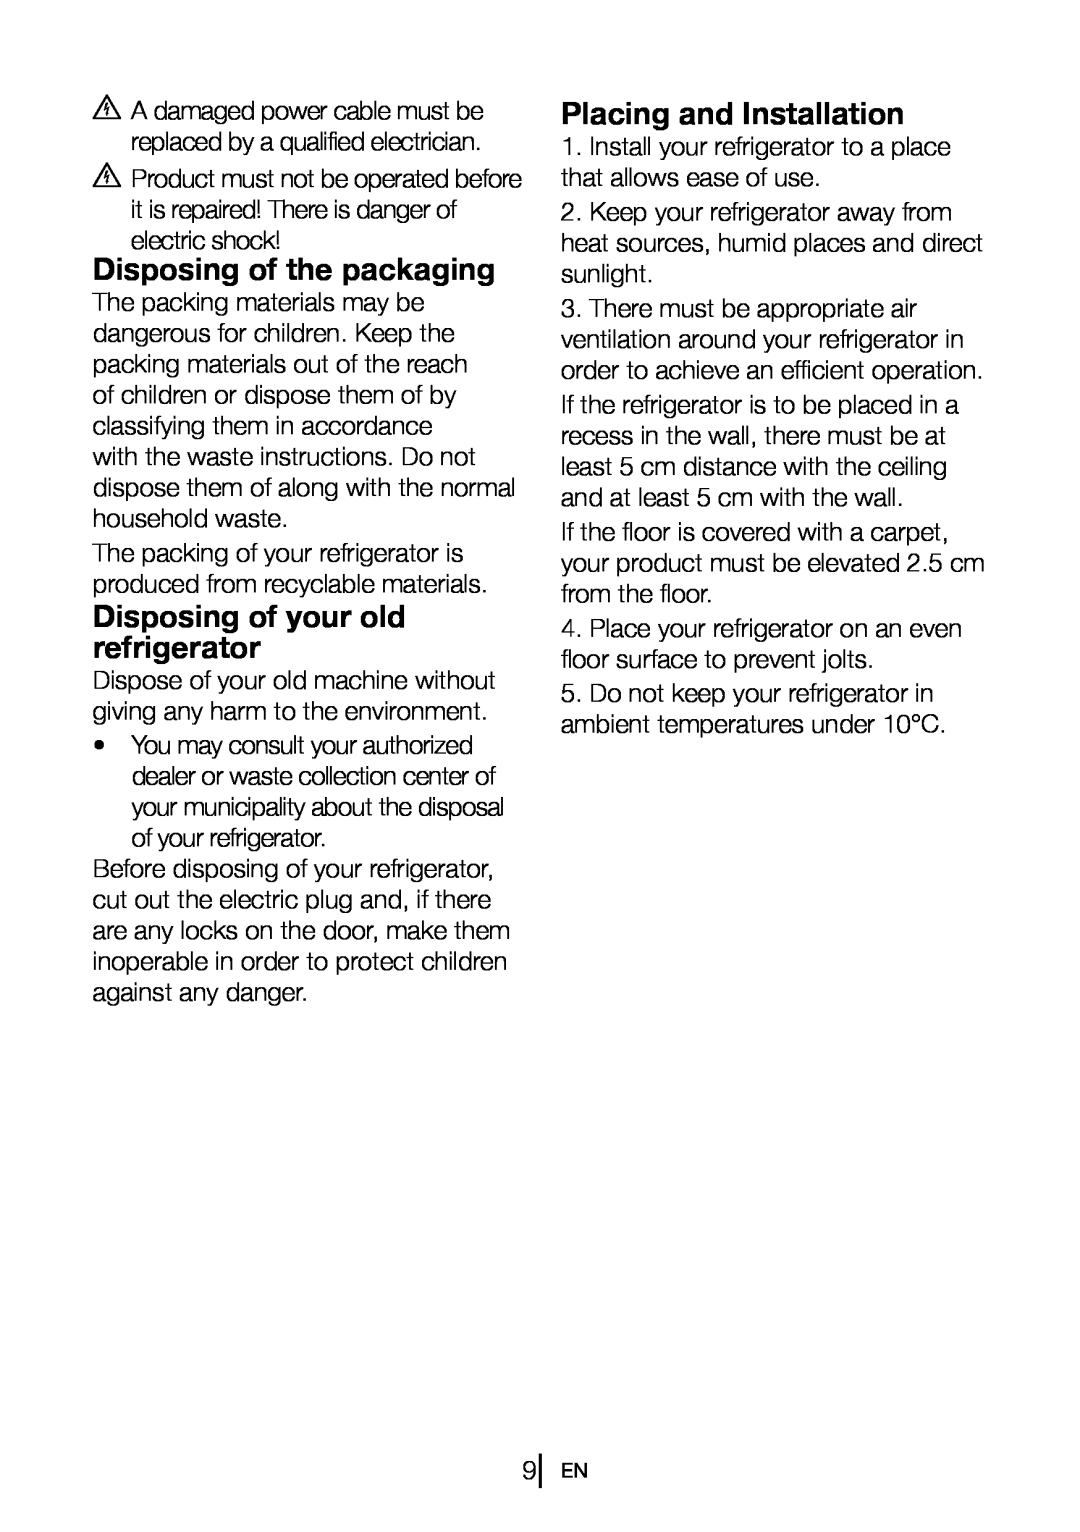 Blomberg 9682 XA+, FNT 9681 XA+ Disposing of the packaging, Disposing of your old refrigerator, Placing and Installation 